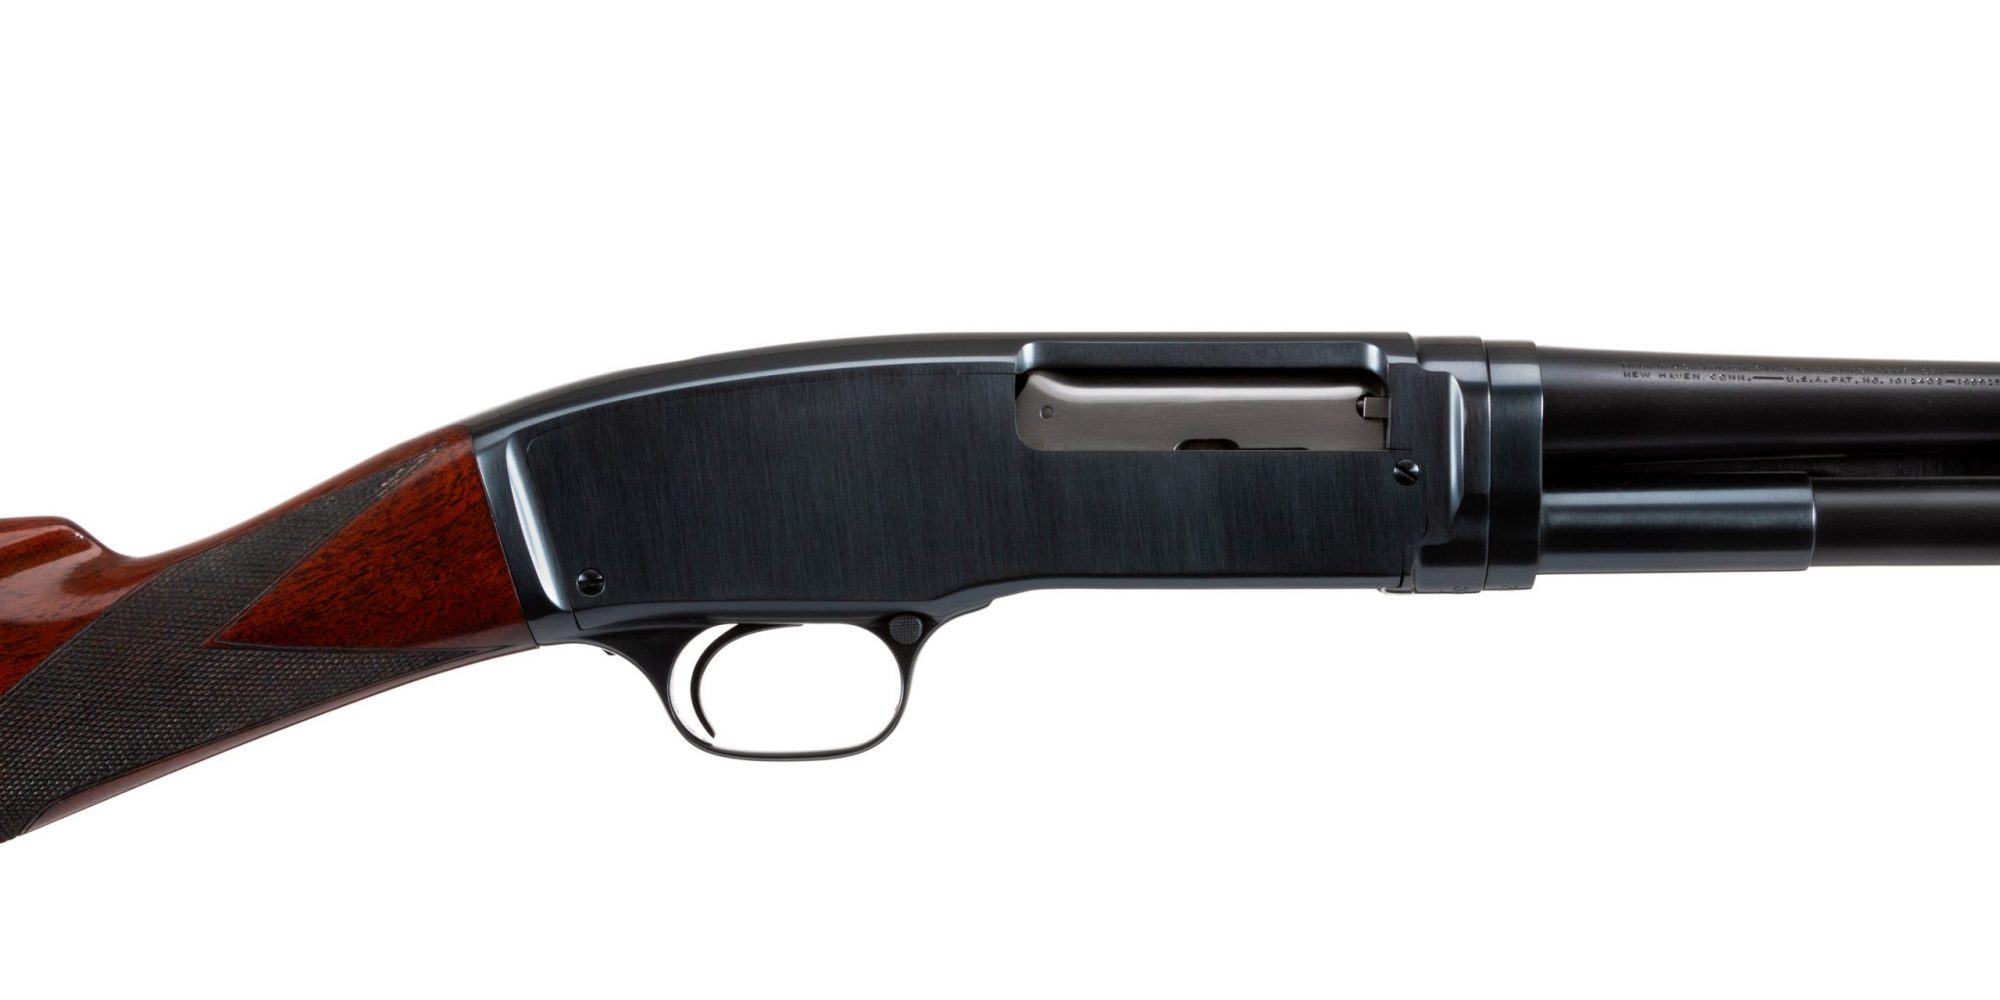 Photo of a Winchester Model 42, restored by Turnbull Restoration and featuring all period-correct finishes including charcoal bluing